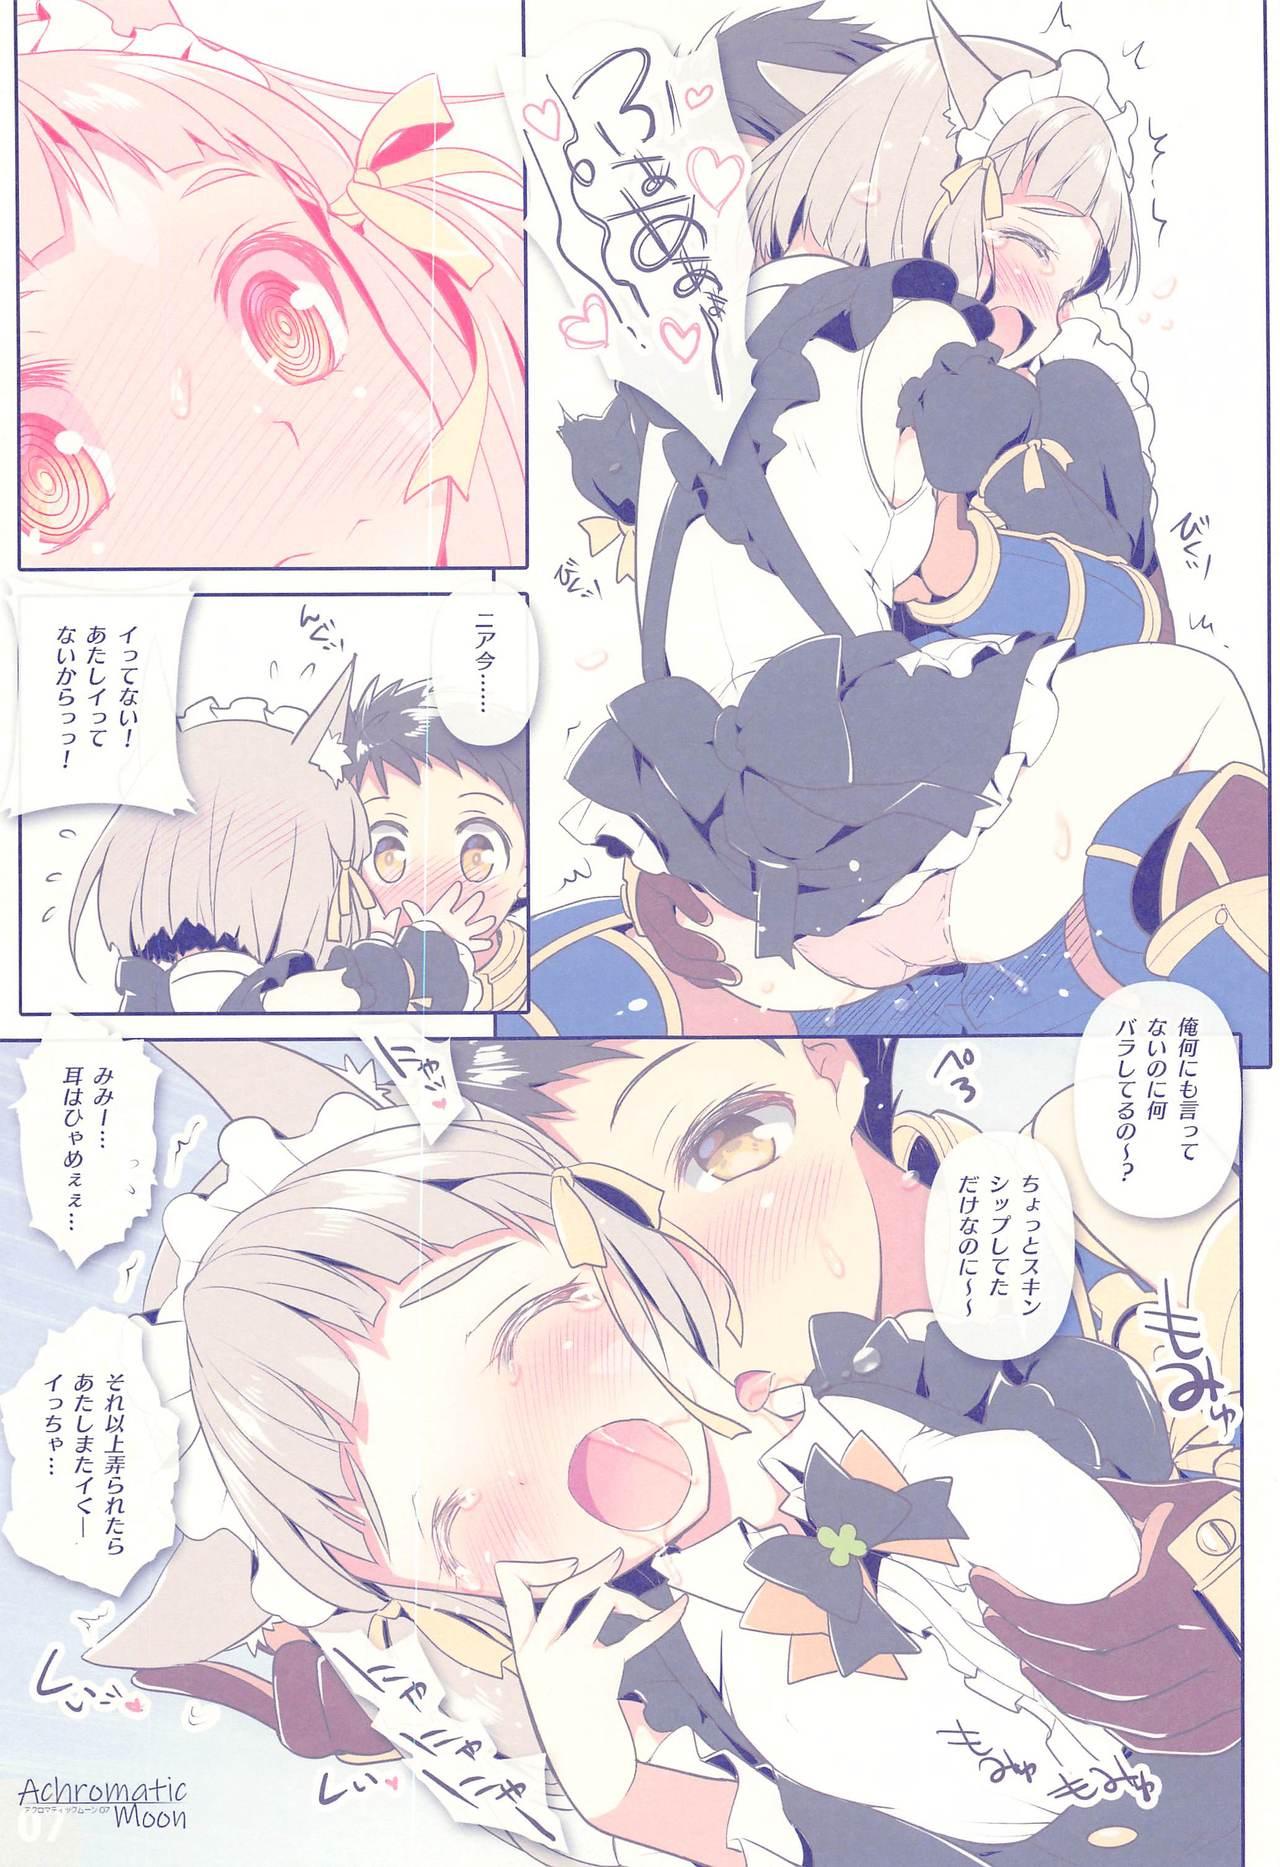 Sucking Dicks Achromatic Moon 07 - Xenoblade chronicles 2 Lingerie - Page 6